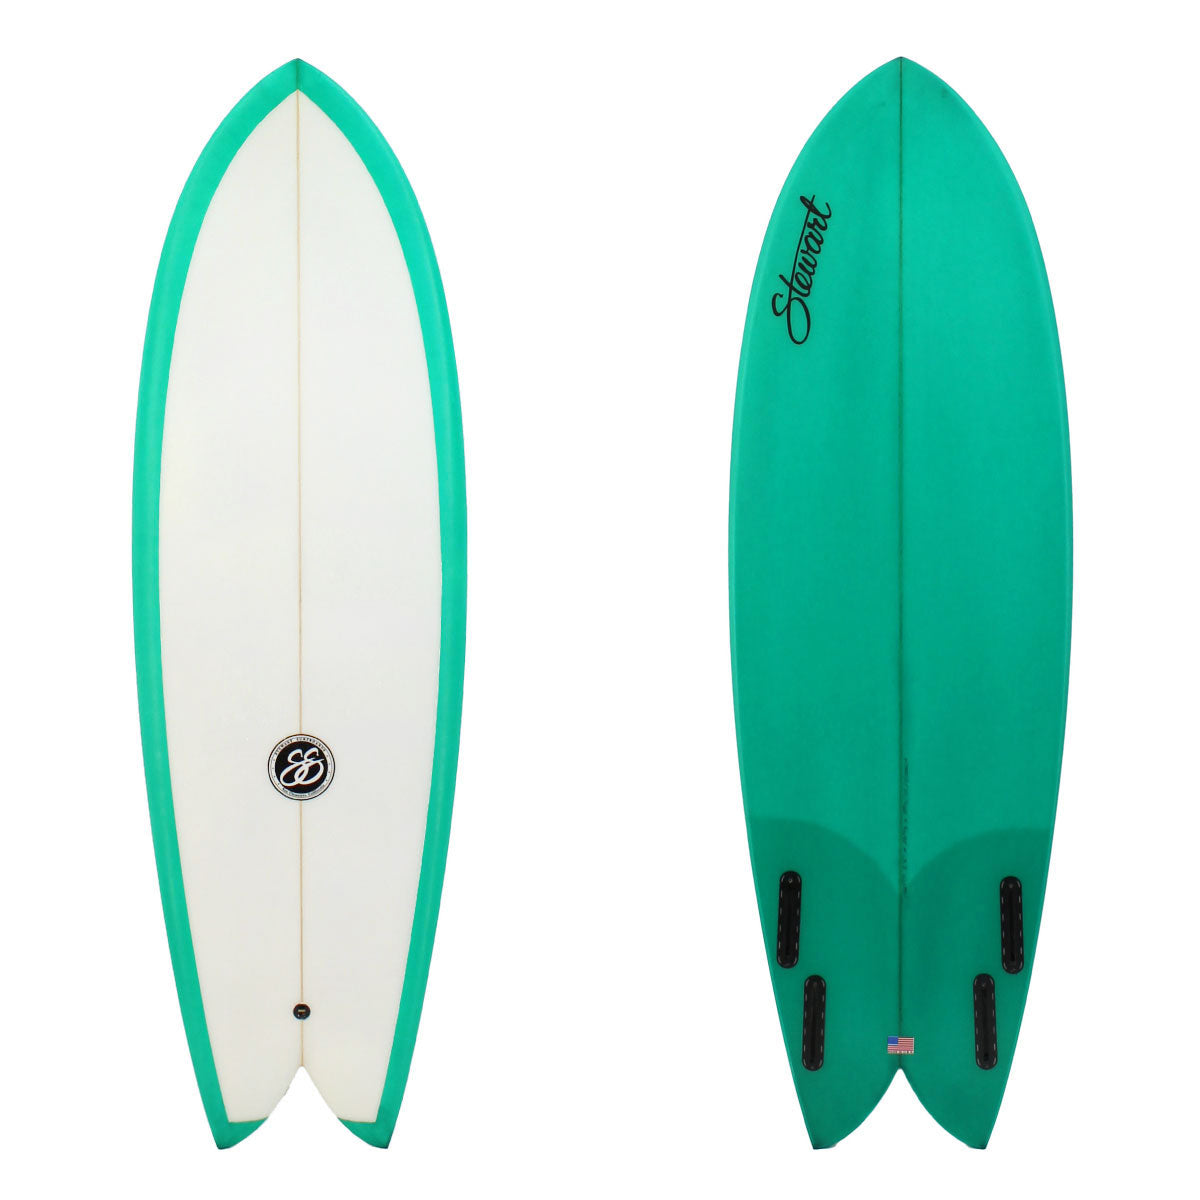 Stewart Surfboards 5'6 Retro Fish with aqua resin tint bottom and rails